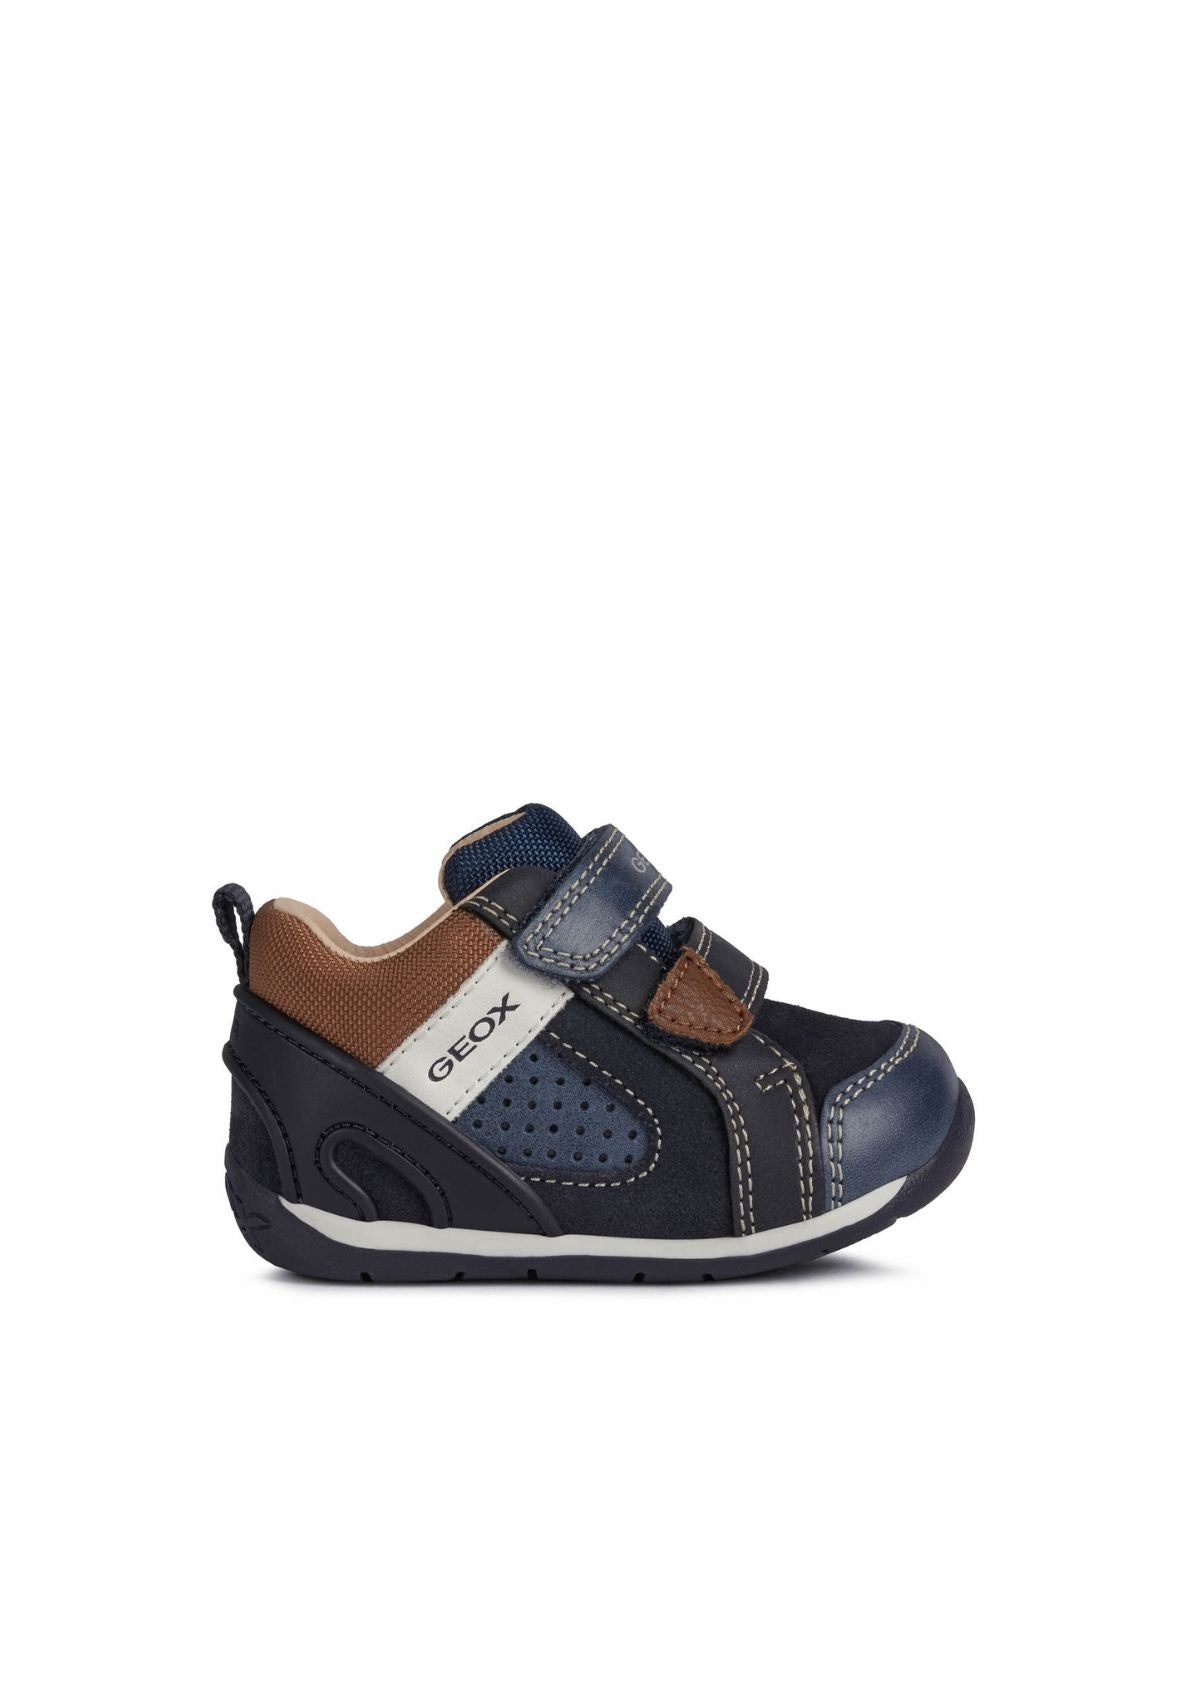 Geox Baby Boys Trainers EACH Navy Light Brown side